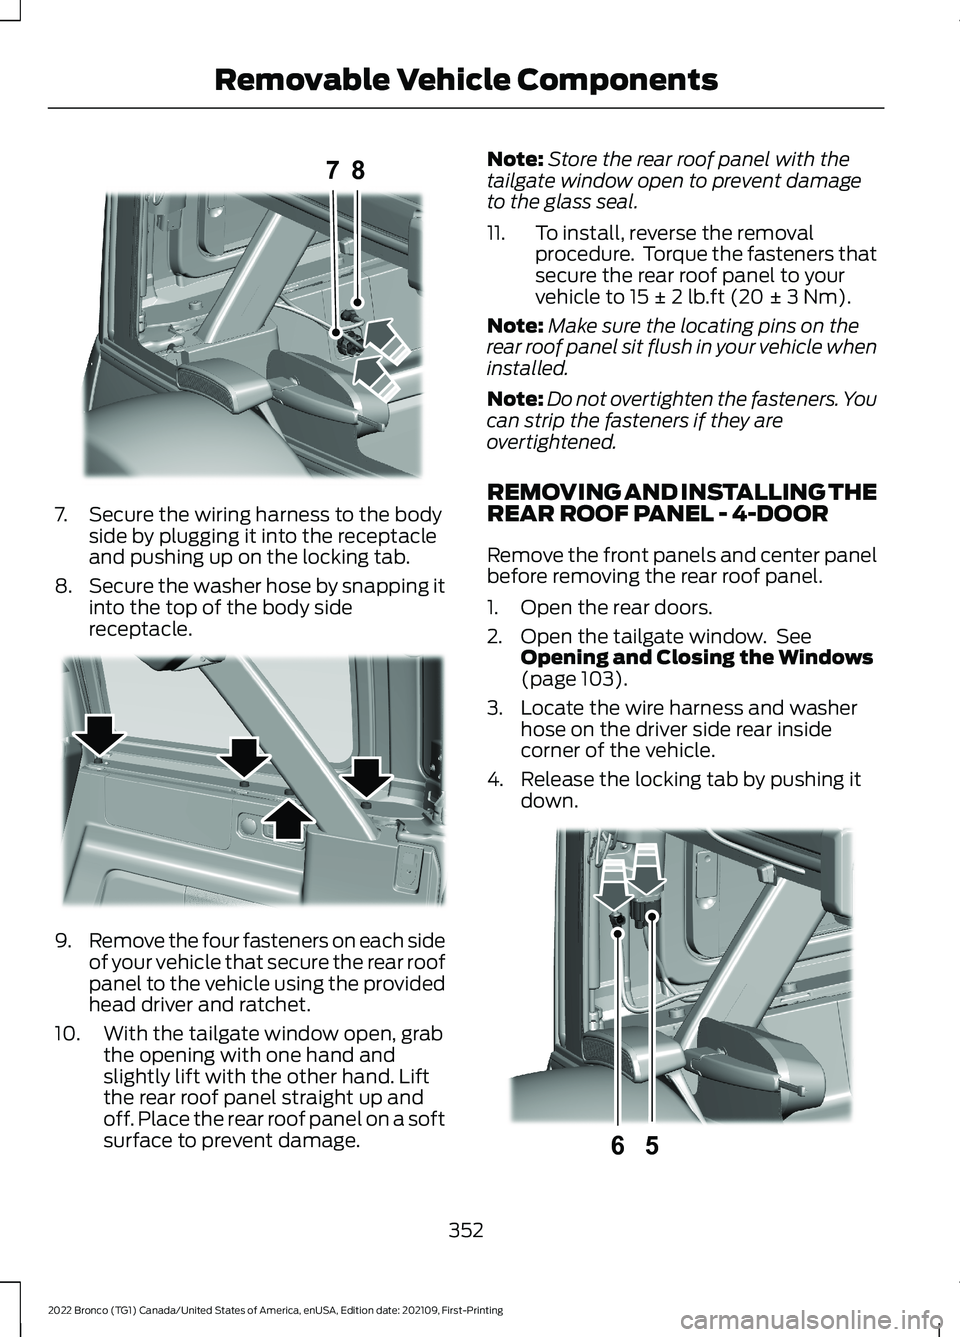 FORD BRONCO 2022  Owners Manual 7.Secure the wiring harness to the bodyside by plugging it into the receptacleand pushing up on the locking tab.
8.Secure the washer hose by snapping itinto the top of the body sidereceptacle.
9.Remov